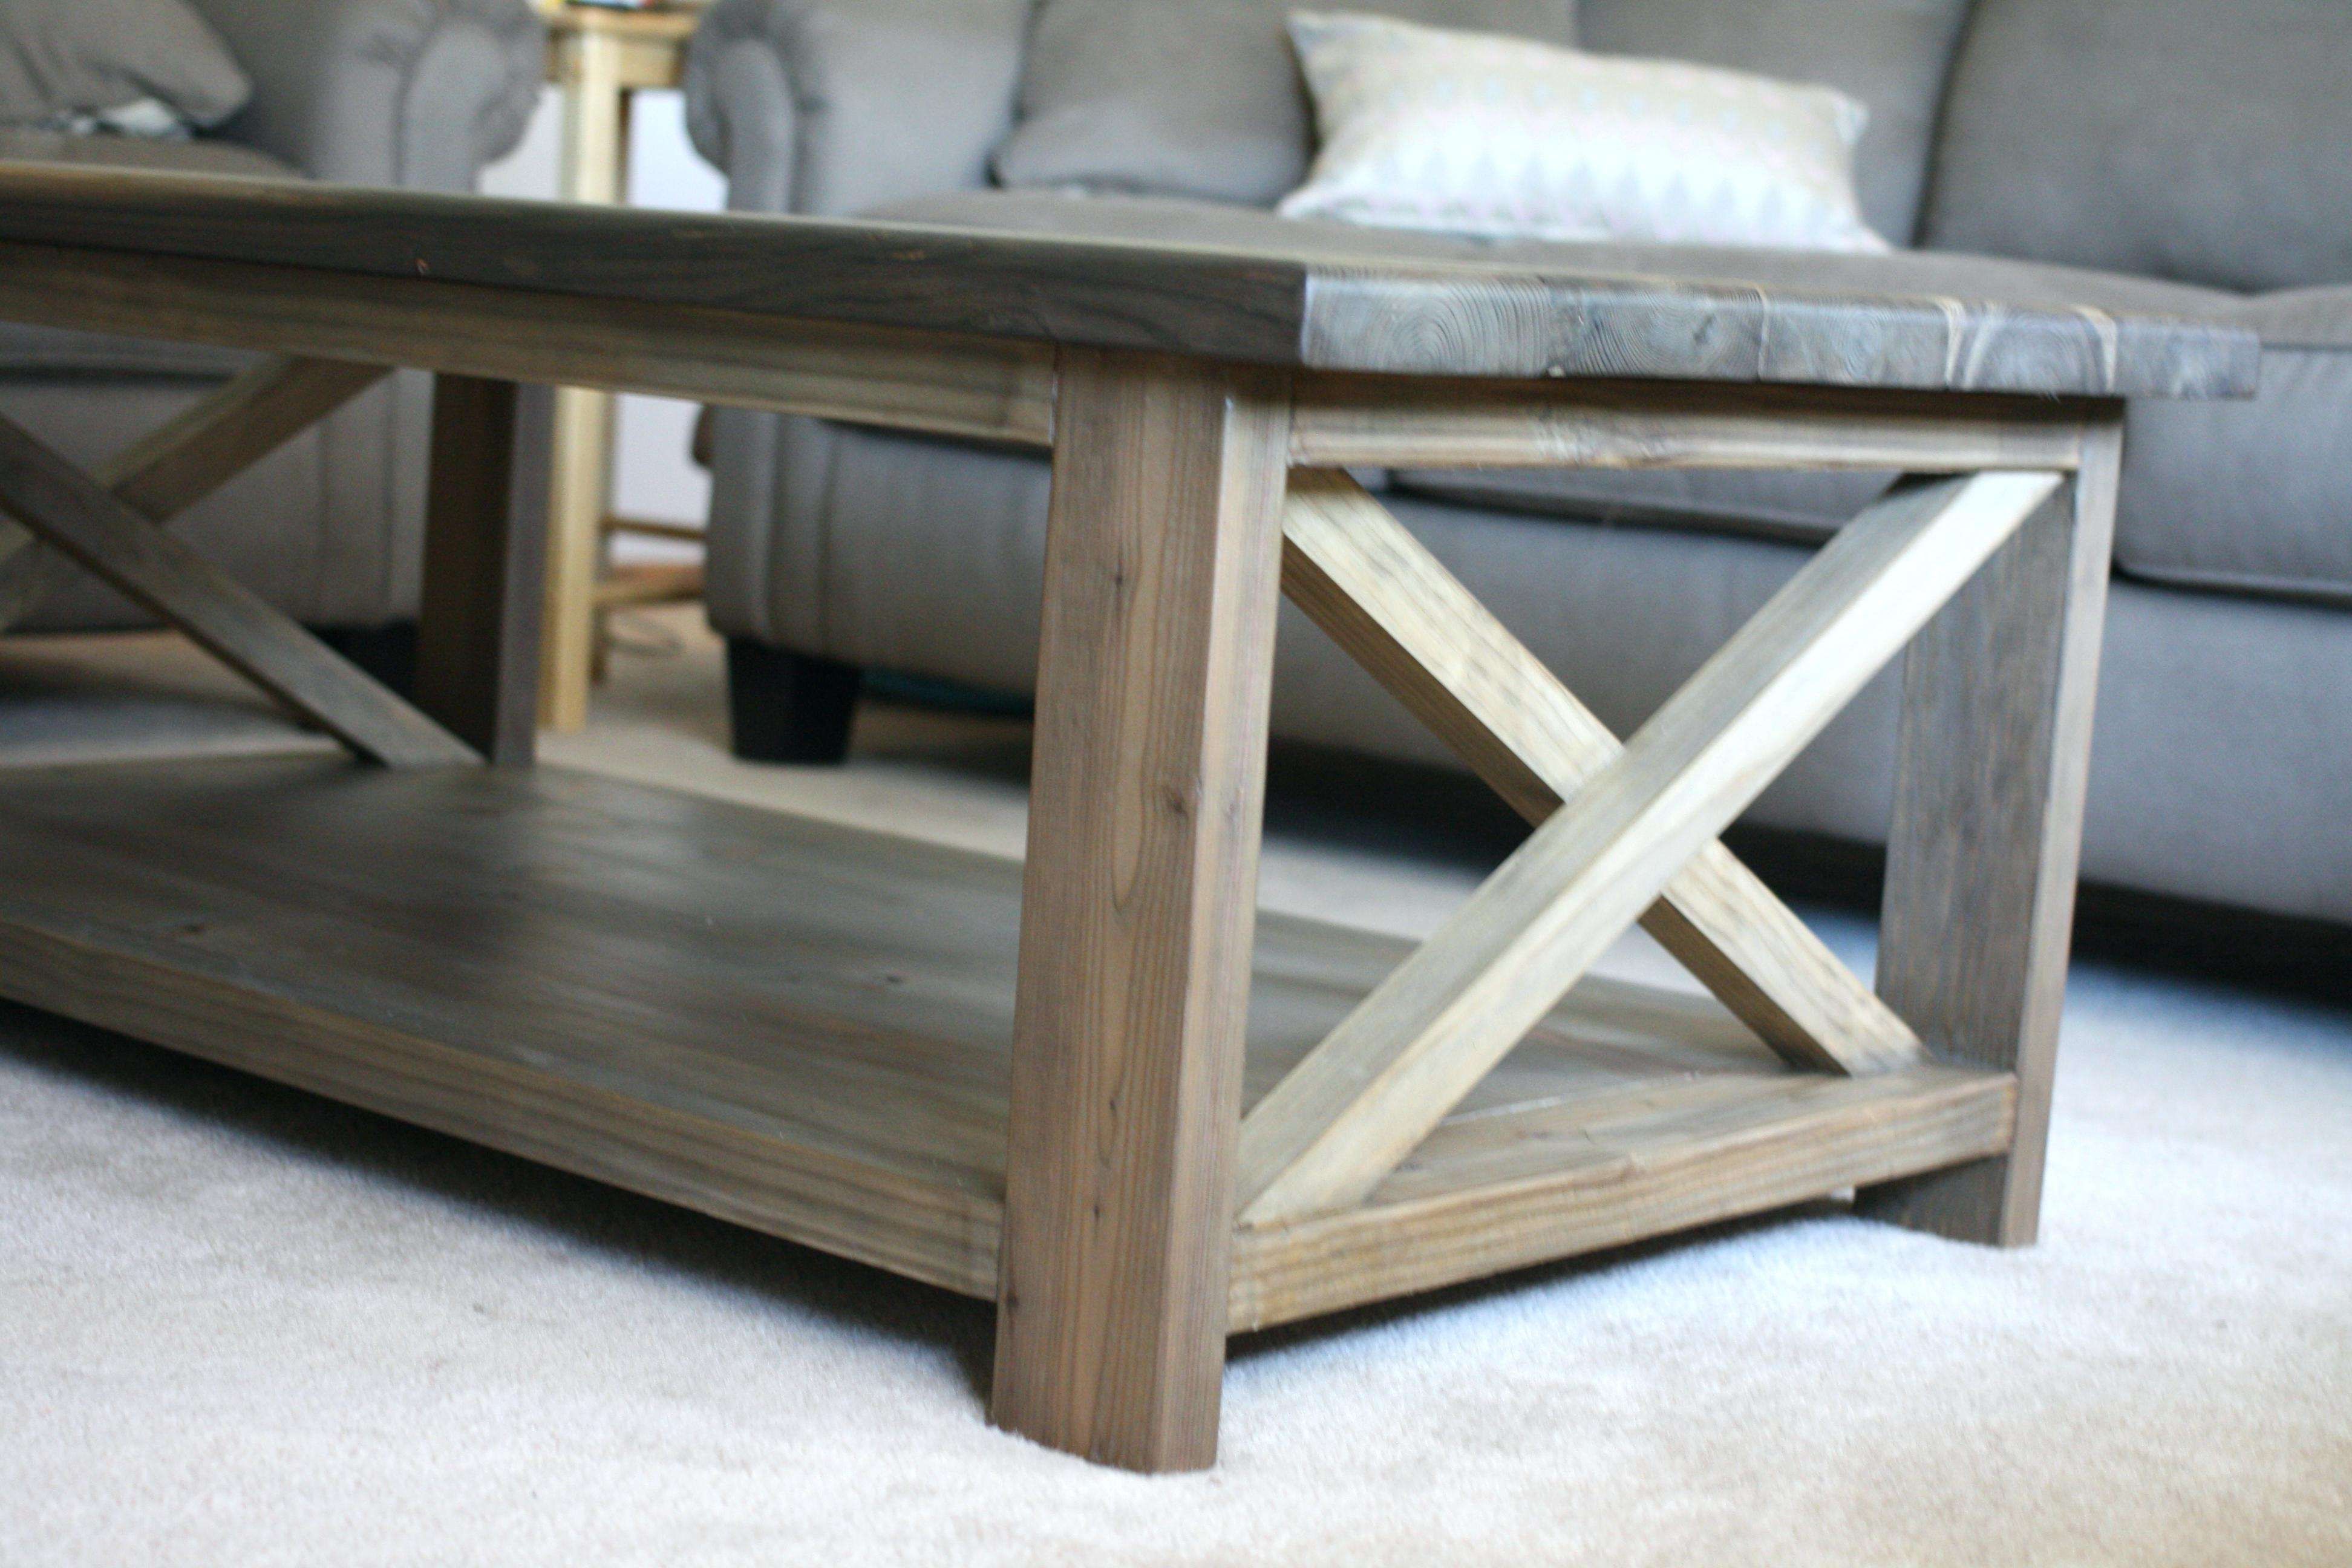 Rustic Coffee Table For Sale Ontario Tv Stand And Set Calgary With Rustic Coffee Table And Tv Stands (View 3 of 15)